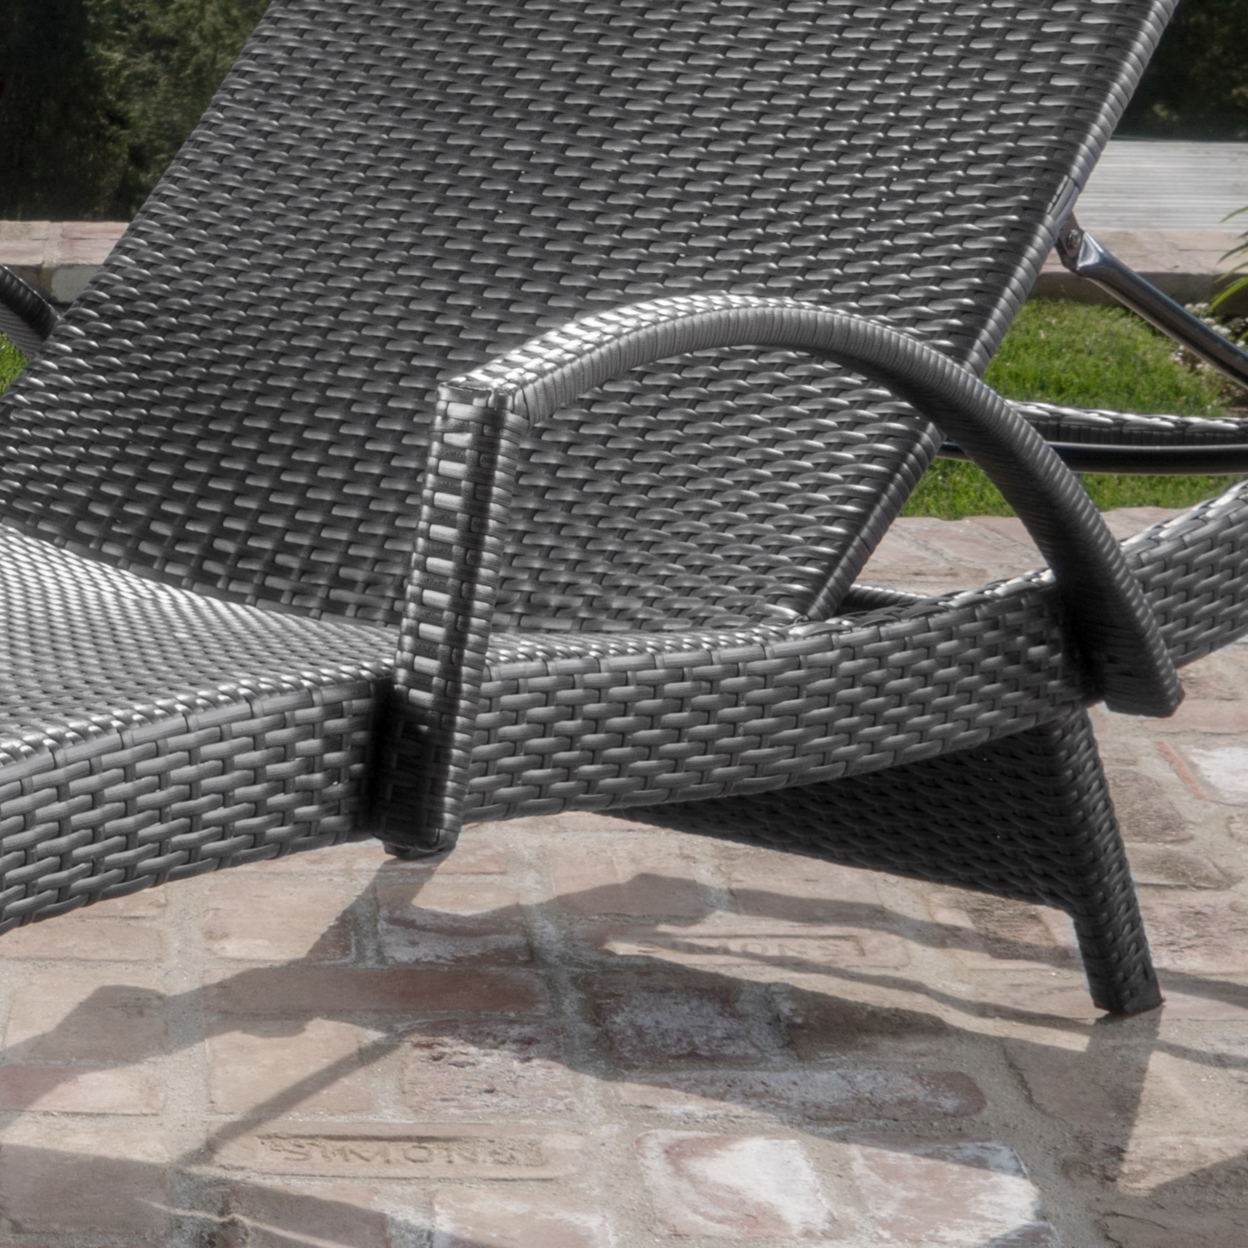 Soleil Outdoor Wicker Chaise Lounges (Set Of 2) With Coffee Table